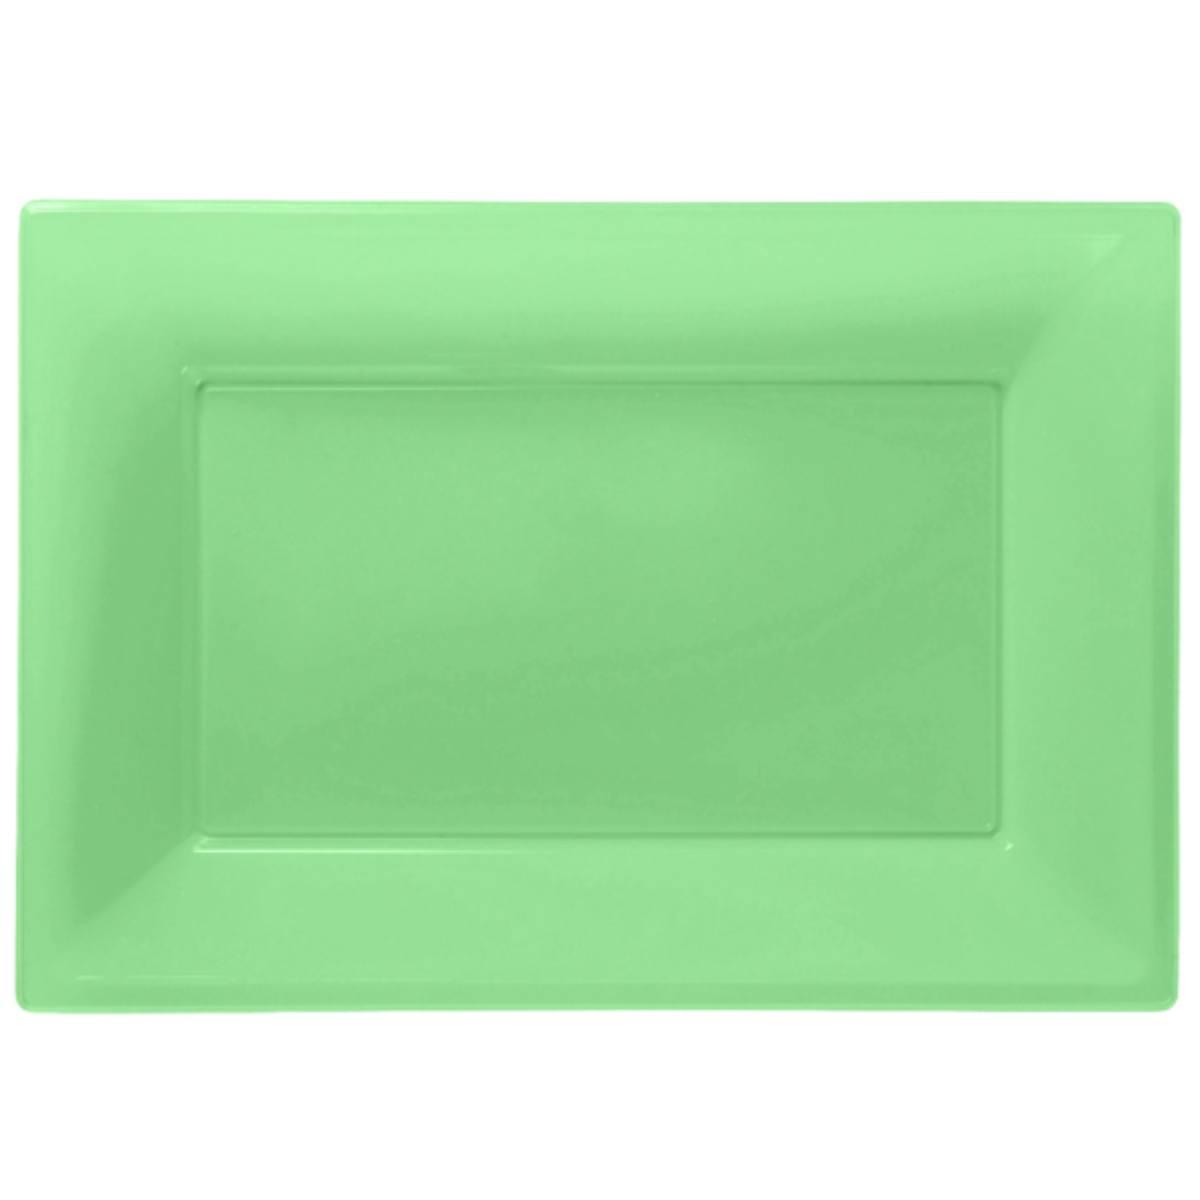 Pk3 Kiwi Green Plastic Serving Platters by Amscan 997430 available here at Karnival Costumes online party shop